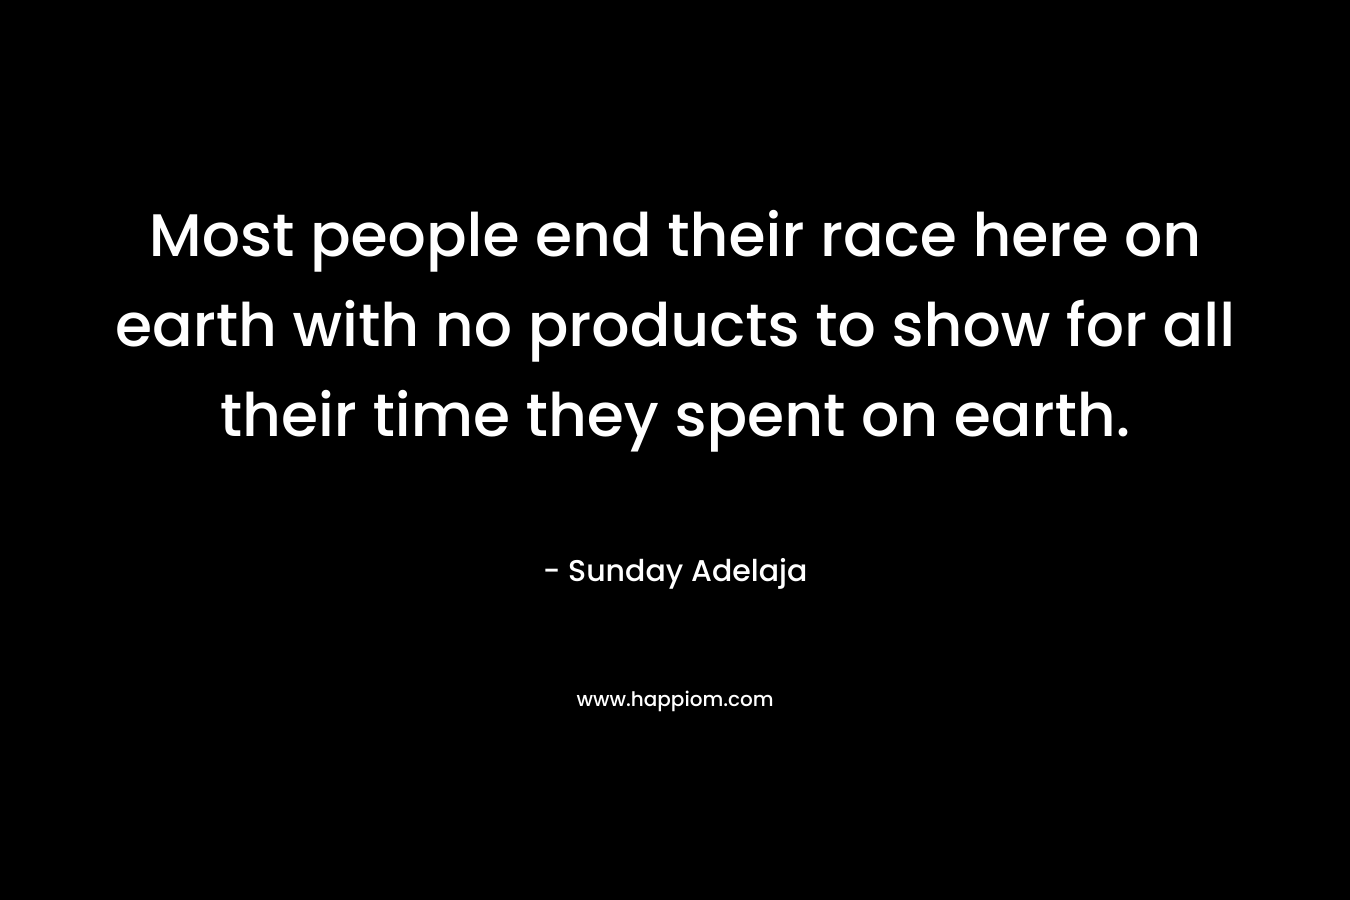 Most people end their race here on earth with no products to show for all their time they spent on earth.